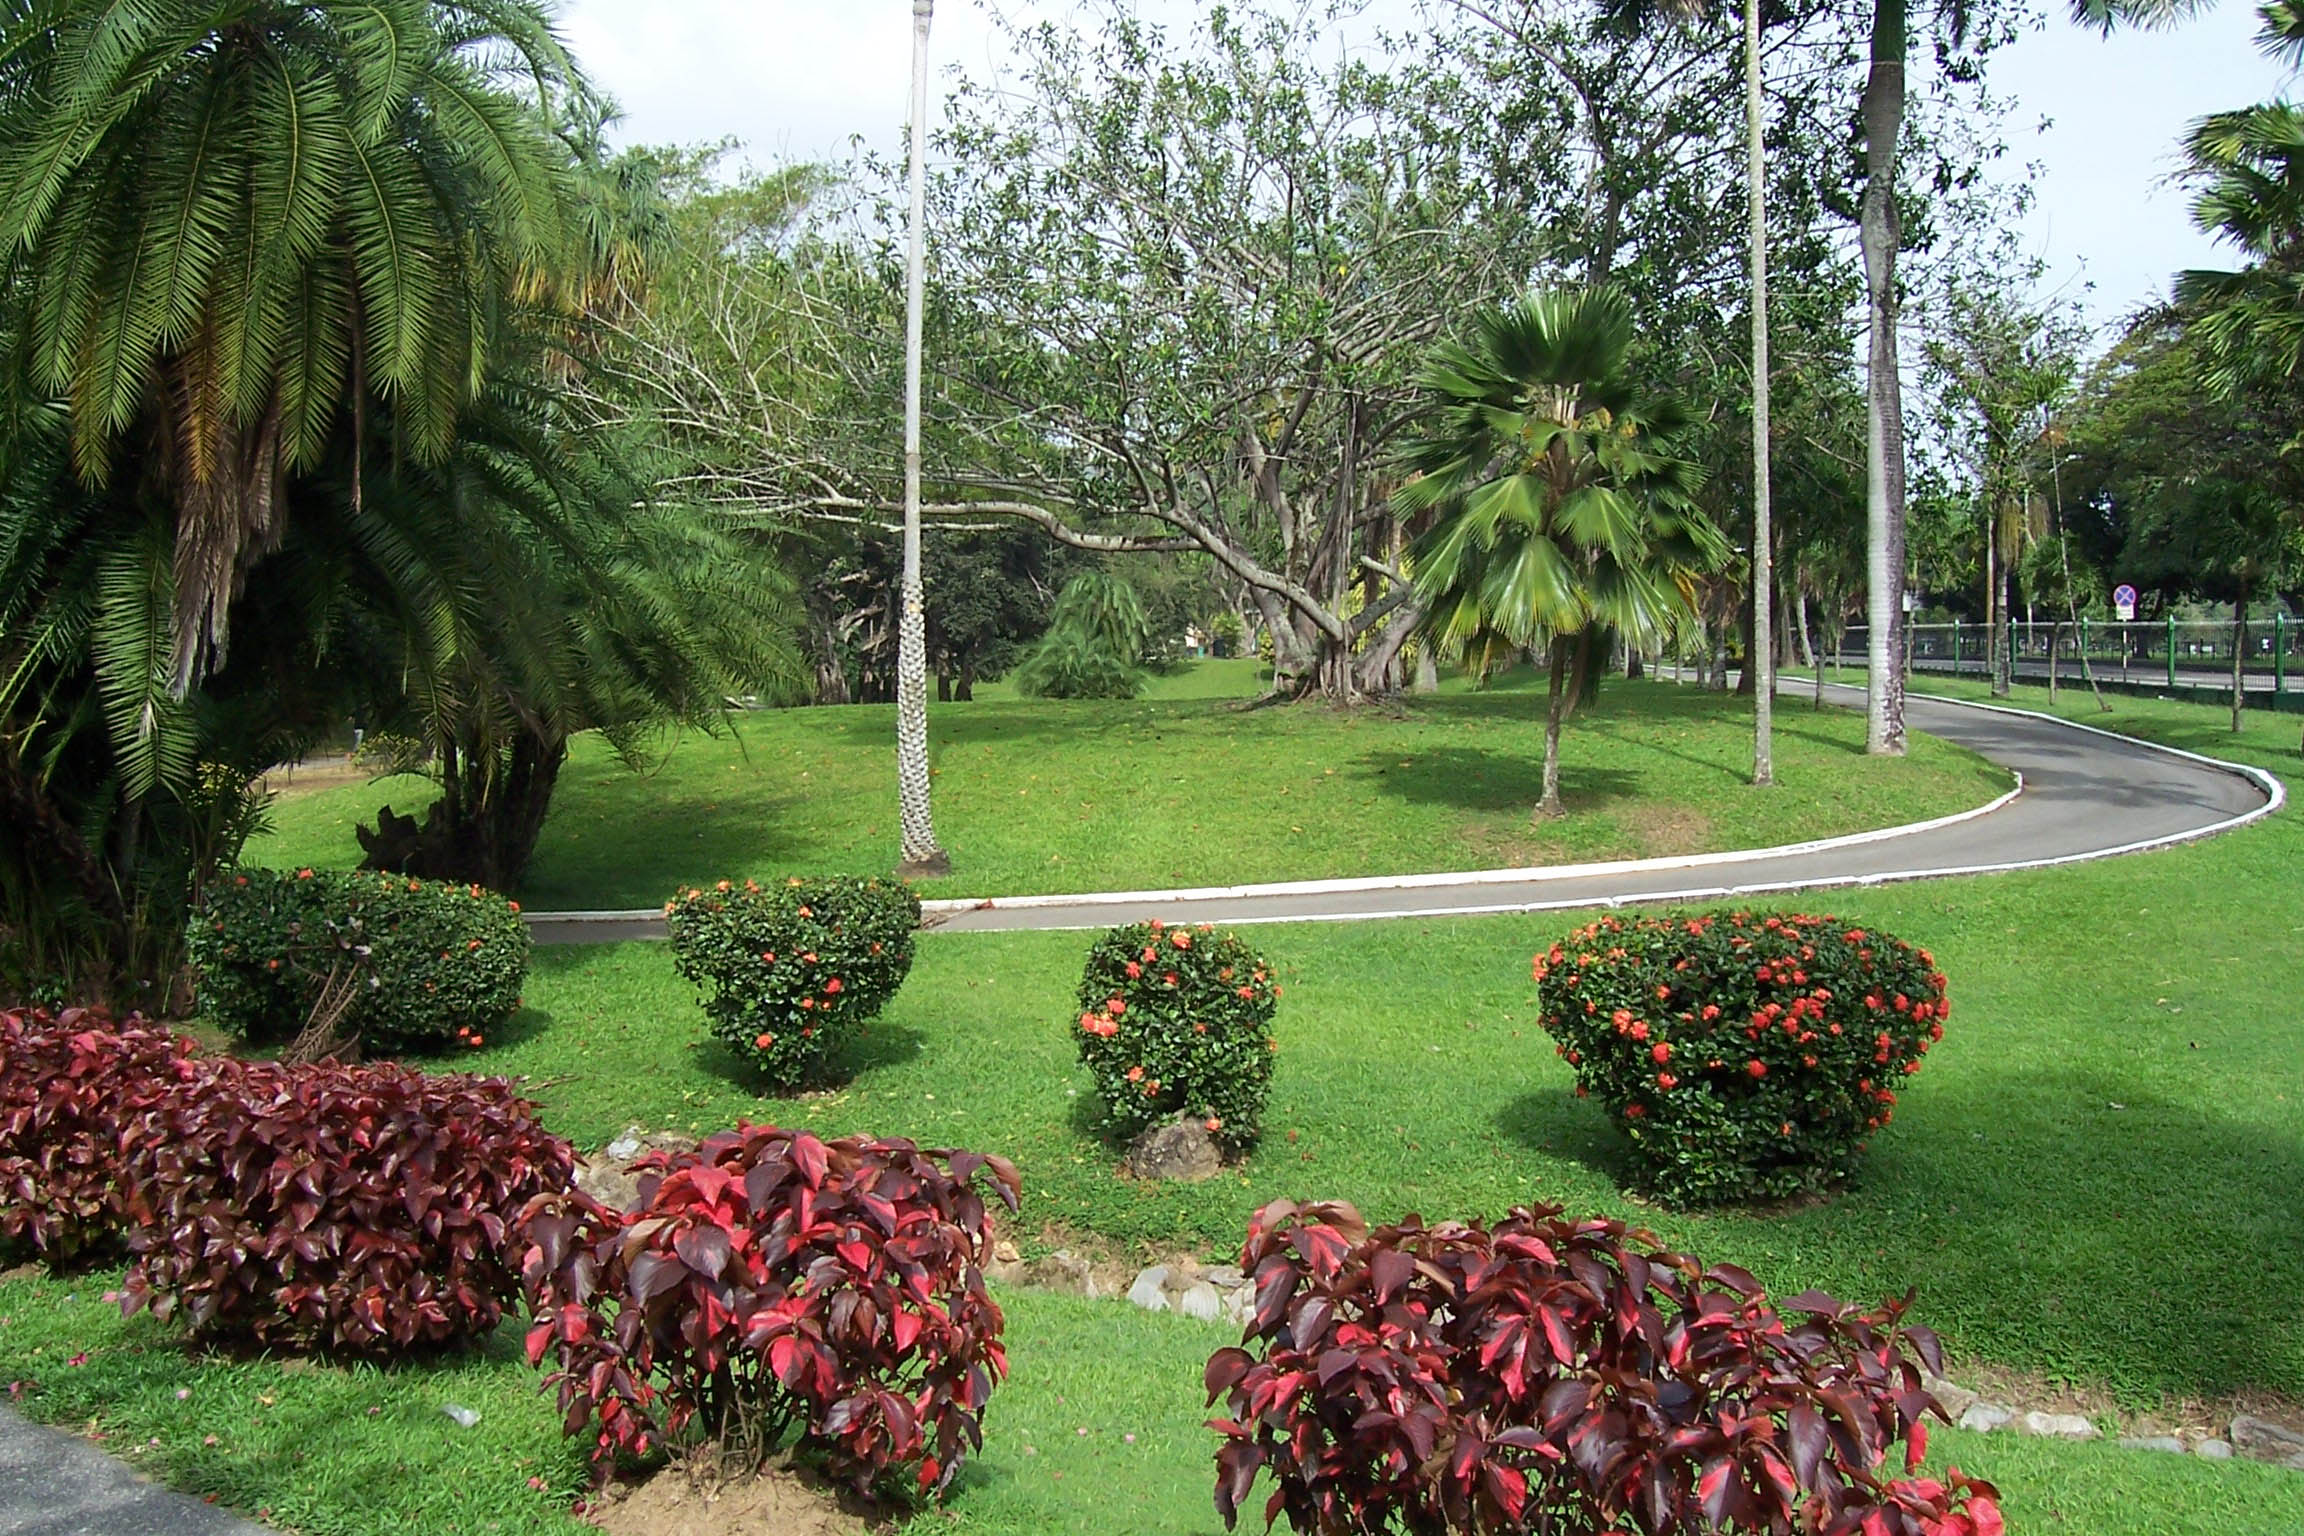 Queen's Park Savannah in Trinidad and Tobago, Caribbean | Parks - Rated 3.8